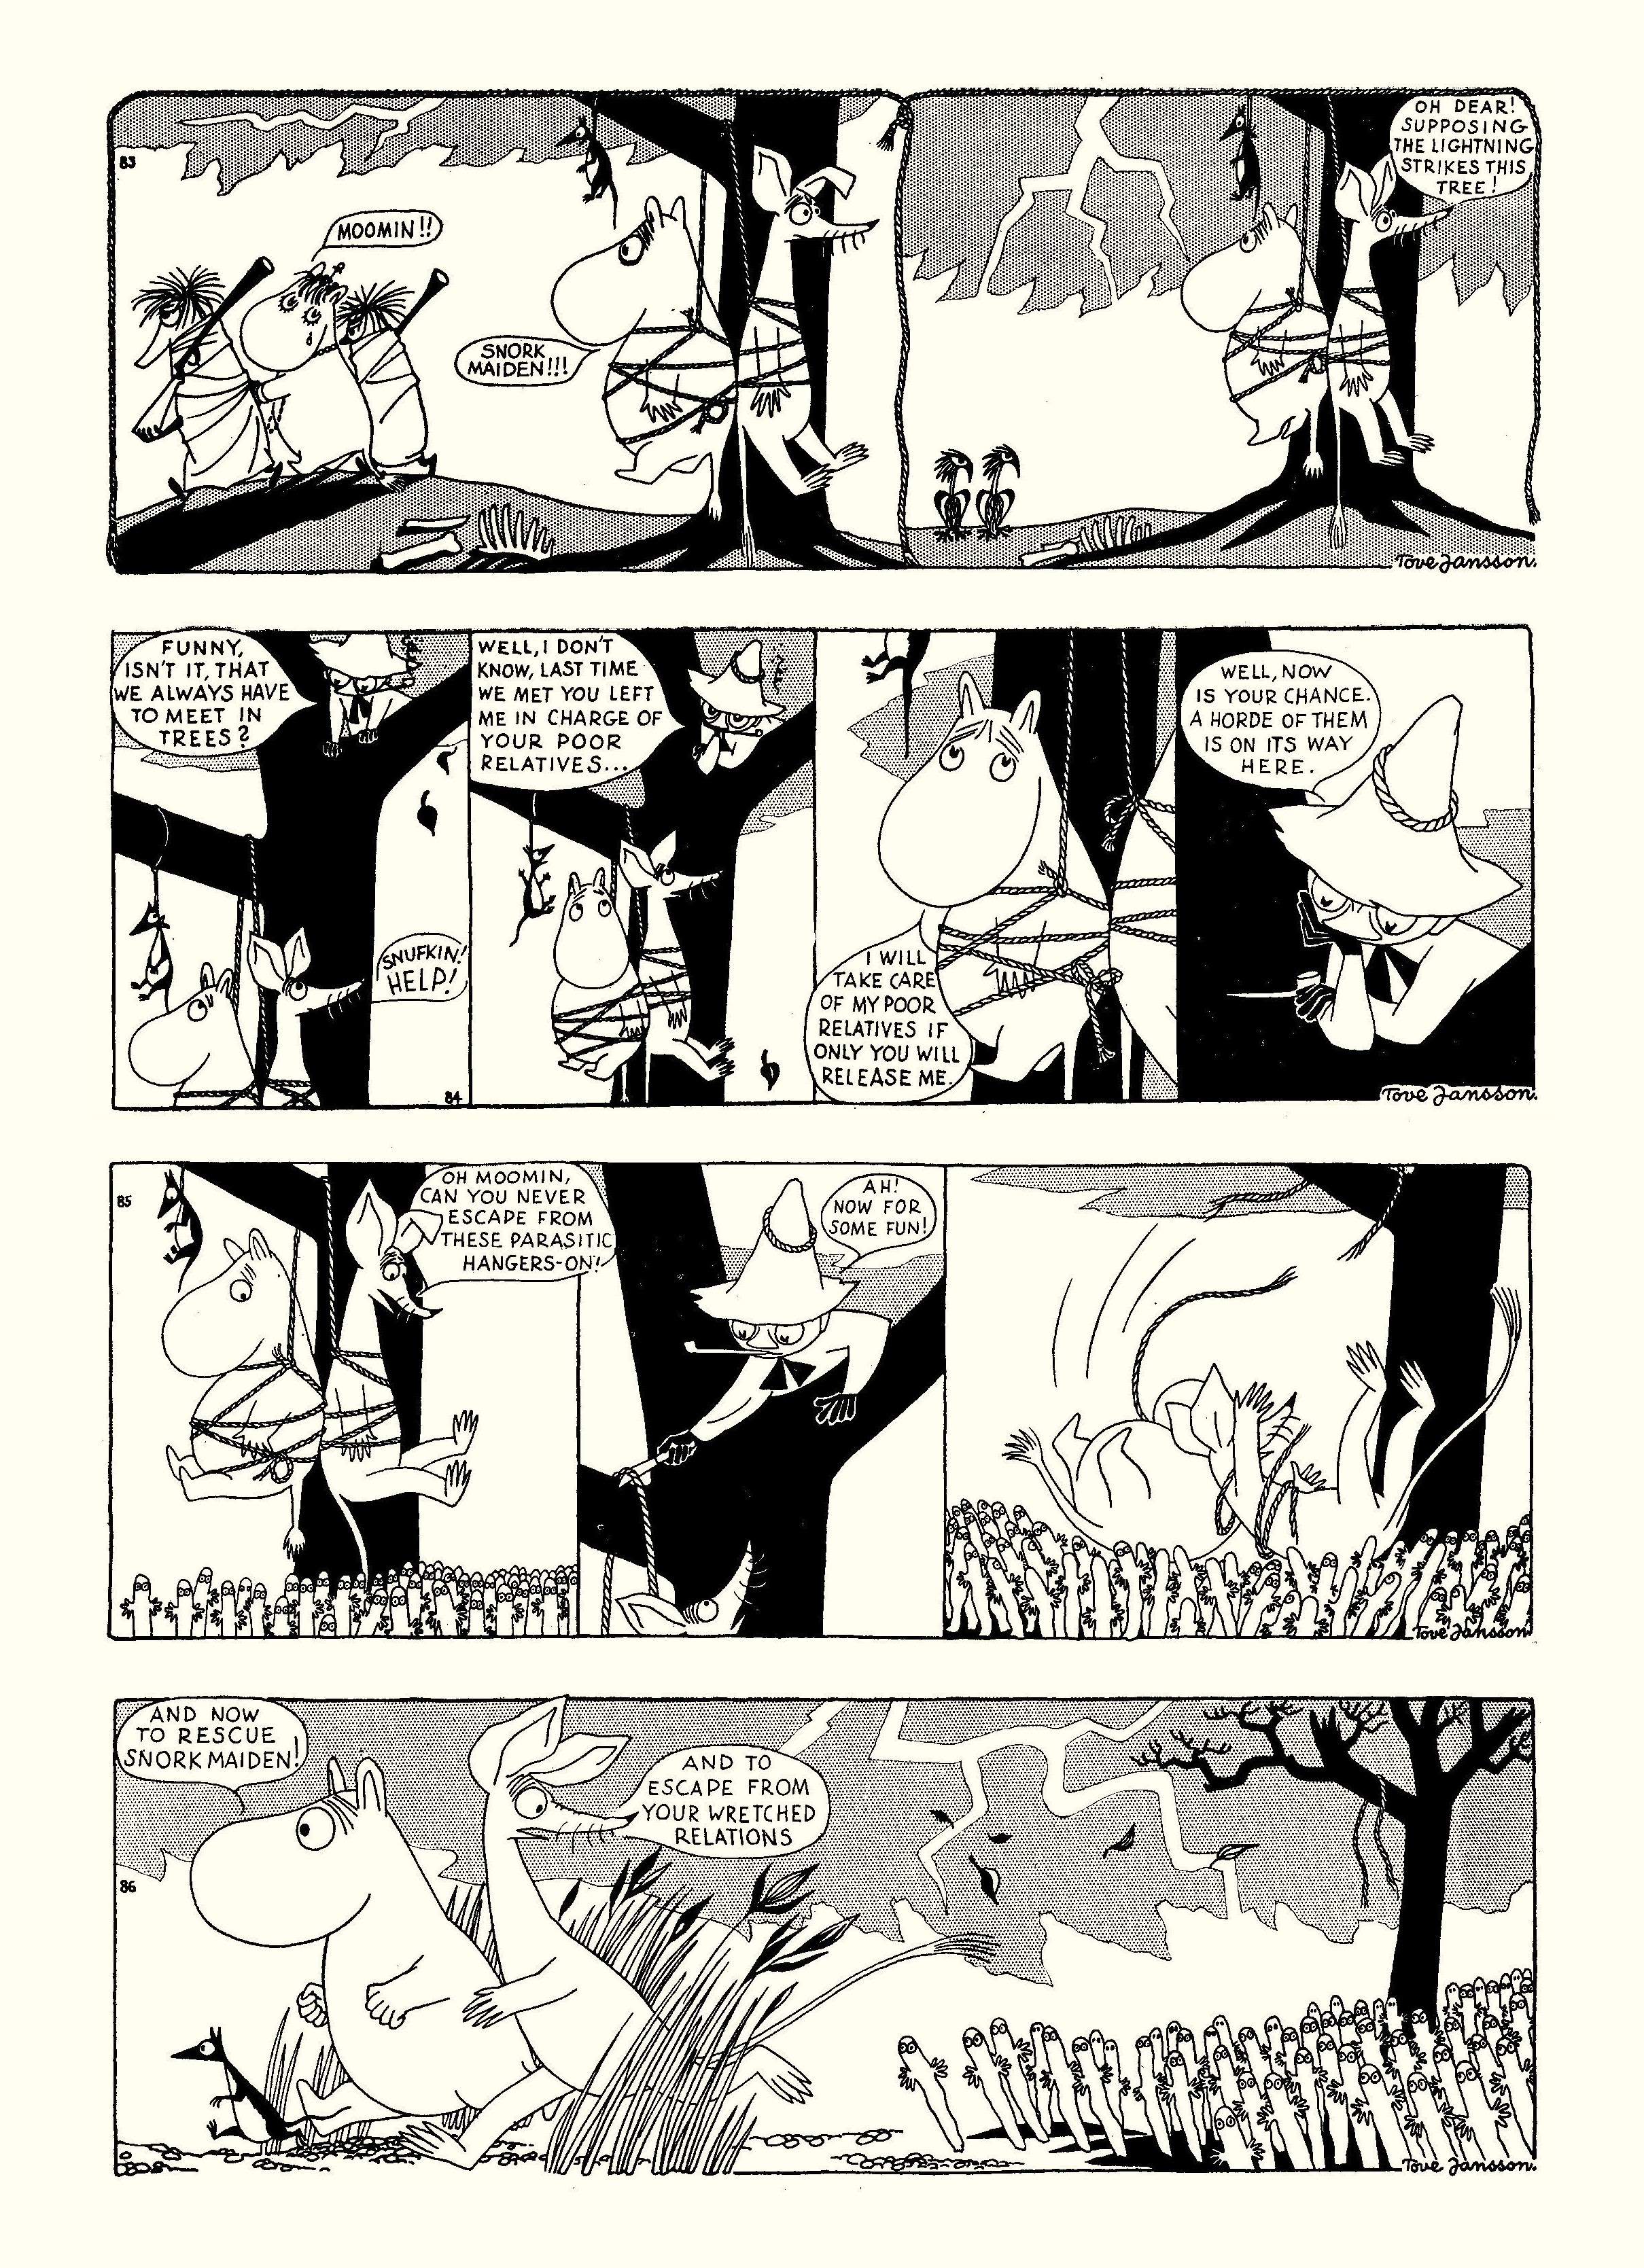 Read online Moomin: The Complete Tove Jansson Comic Strip comic -  Issue # TPB 1 - 27